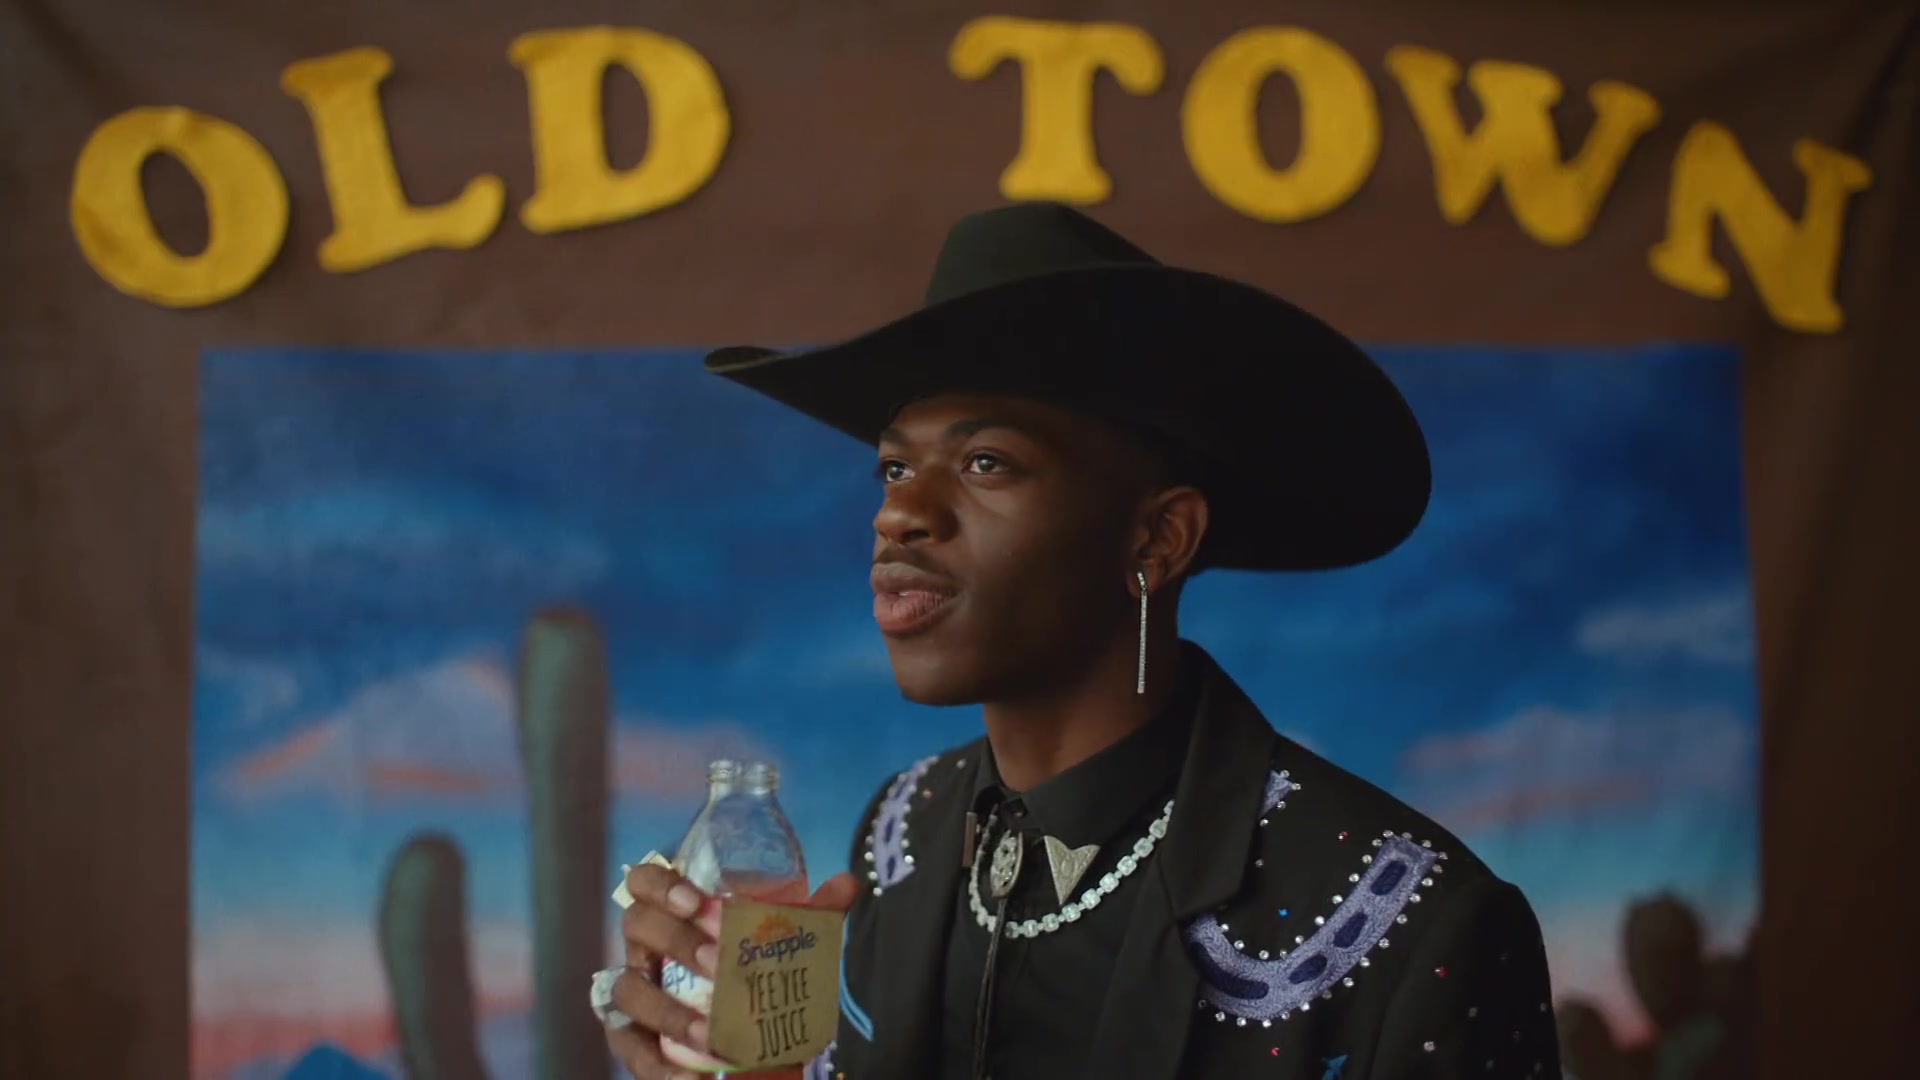 Billy cyrus old town. Lil nas x old Town Road. Lil nas x ковбой. Lil nas x’s old Town Road.